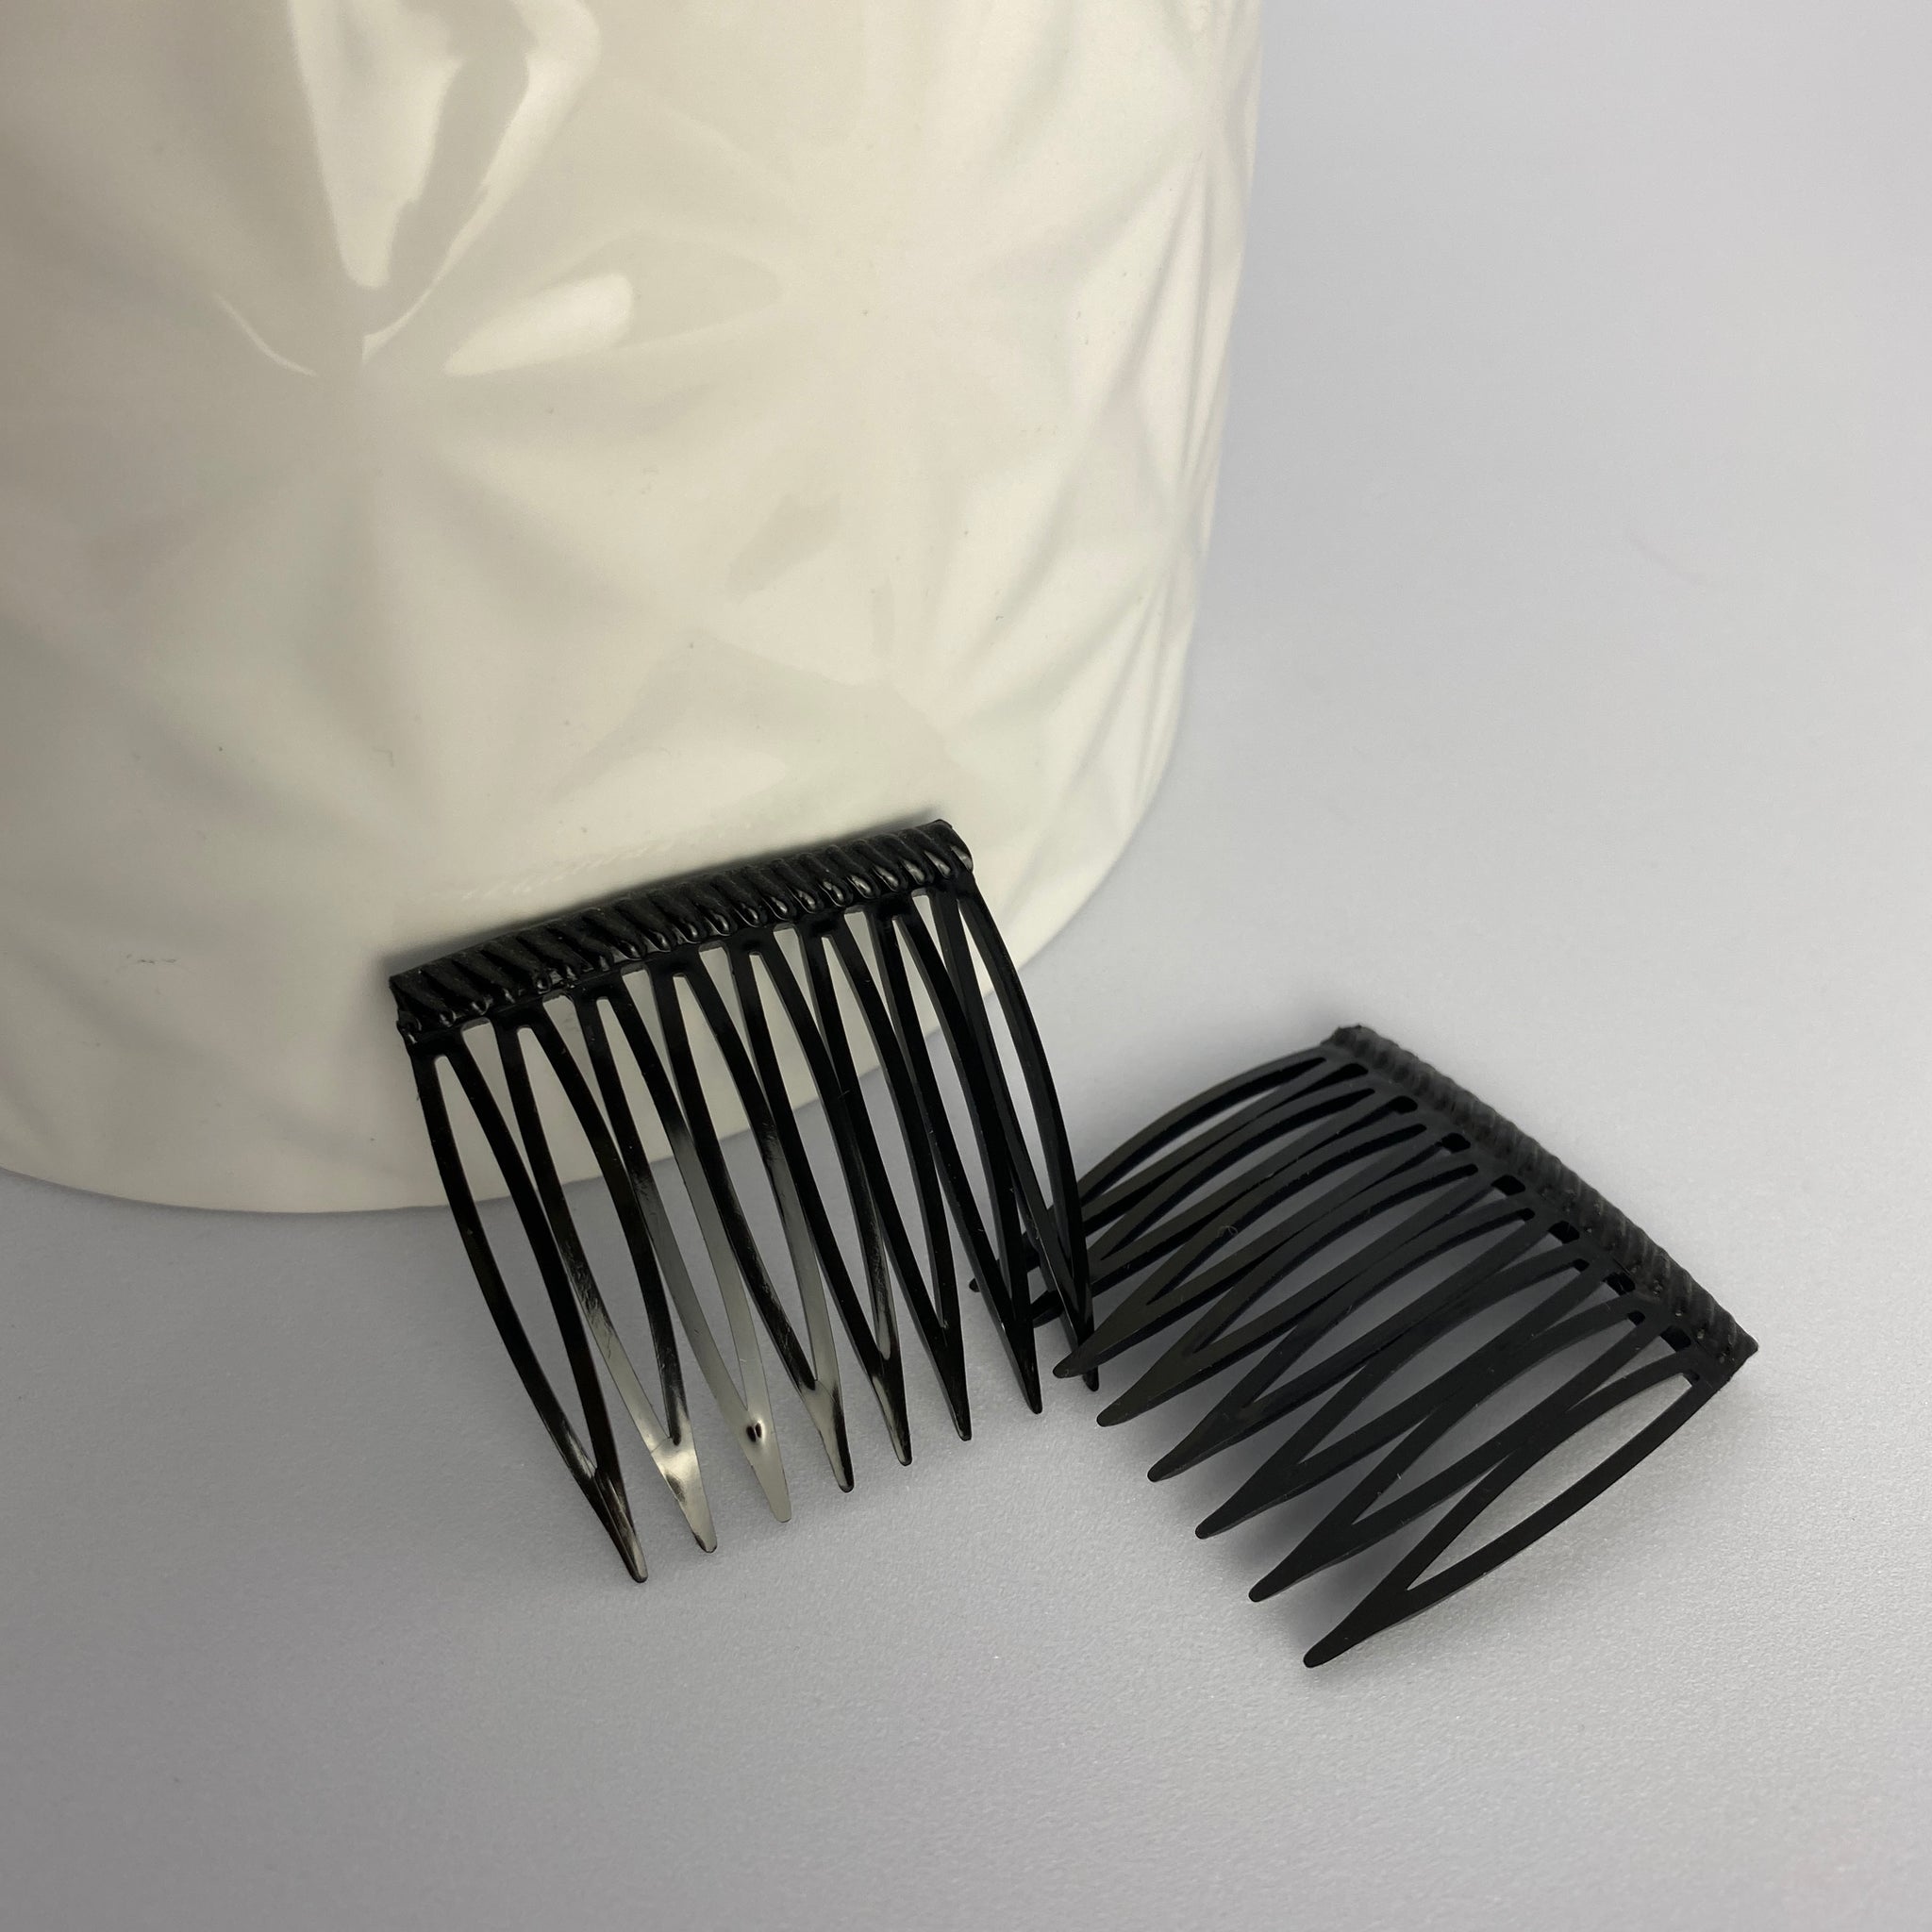 grip tuth comb tuck 1 1/2 inch size in black